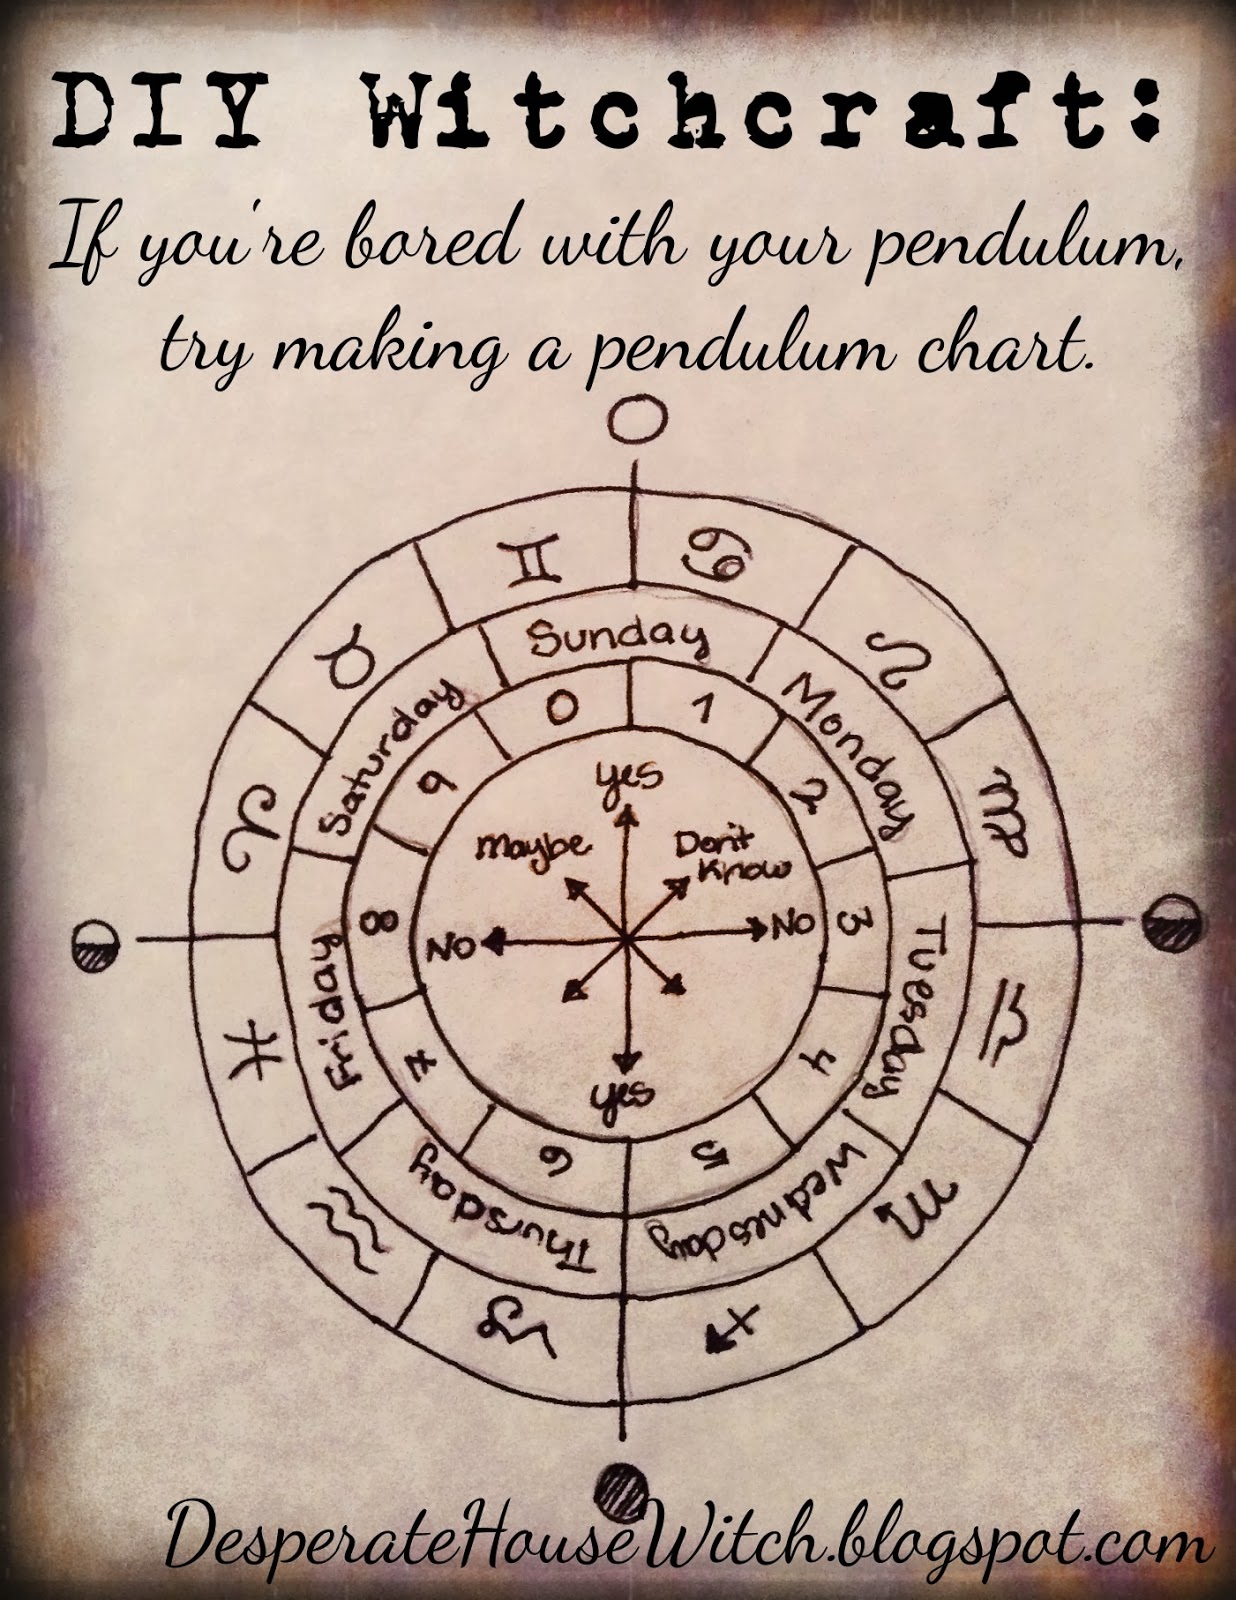 Free Downloadable Pendulum Charts - Please fill this form, we will try